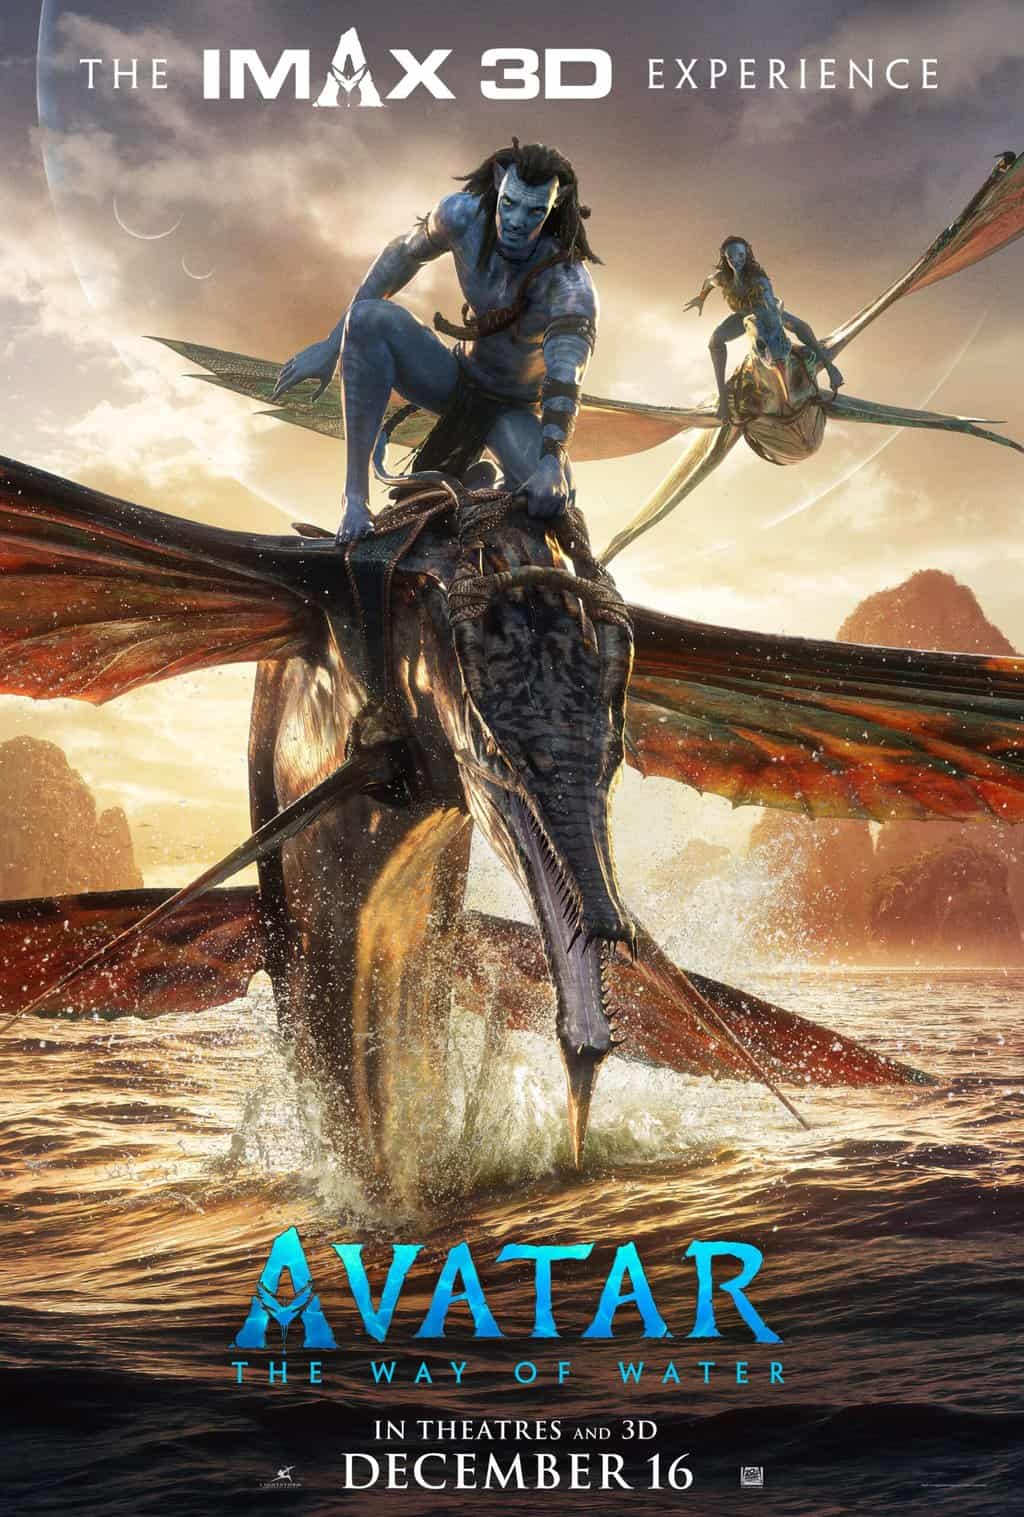 When Can You Pee During Avatar: The Way of Water? Avatar 2 is a long movie: know when you can take those bathroom breaks!